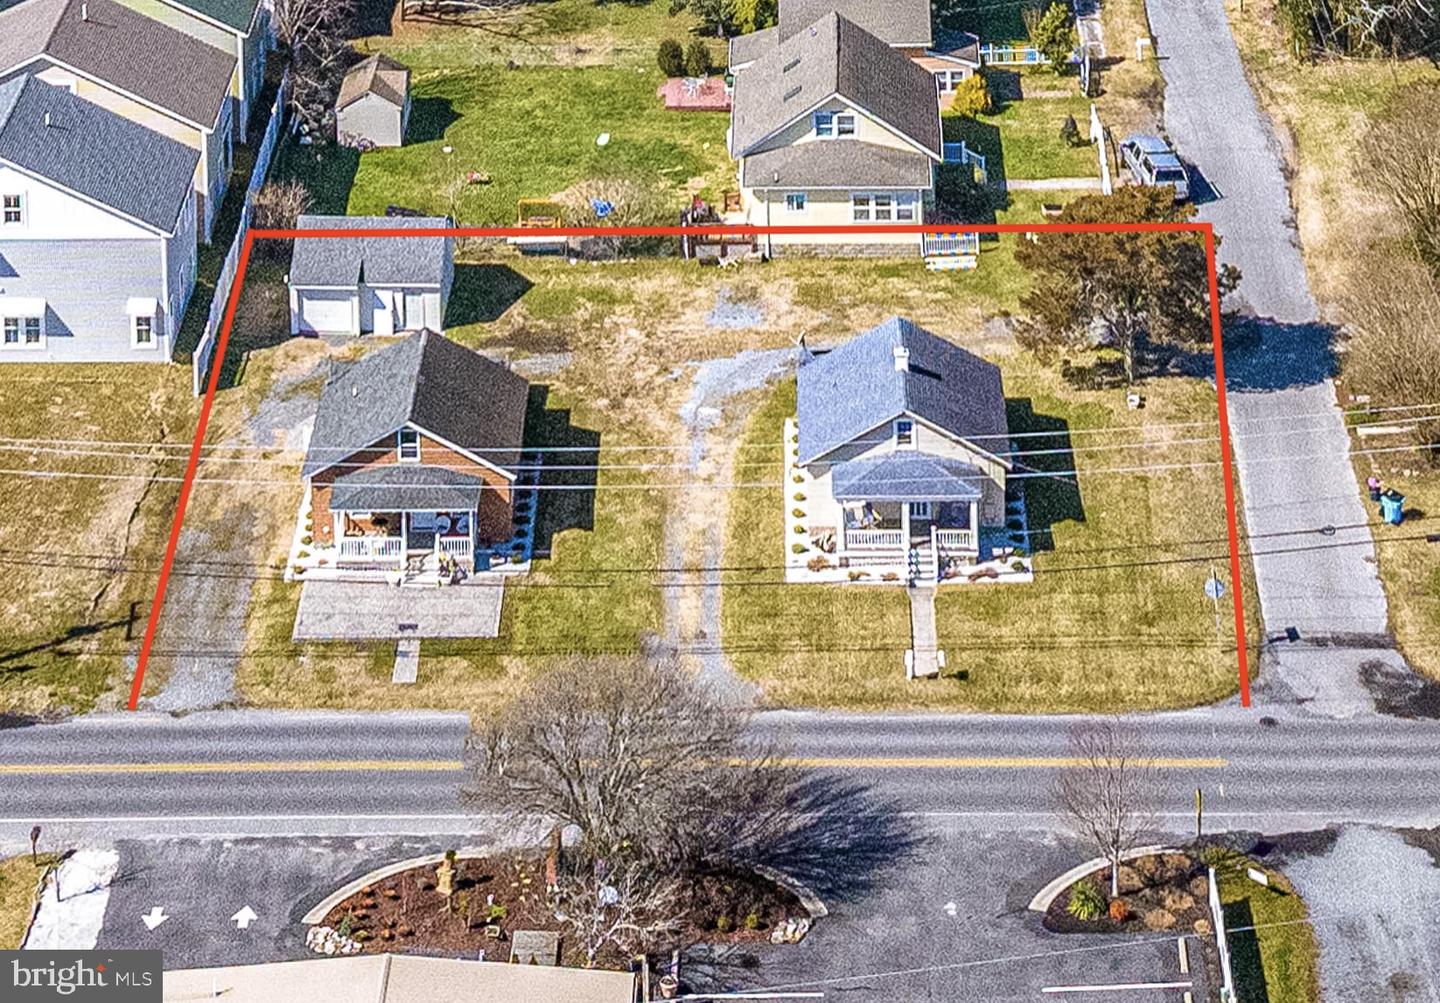 MDWO2019110-802903951182-2024-03-05-14-03-41 9801/9805 Golf Course Rd | Ocean City, MD Real Estate For Sale | MLS# Mdwo2019110  - 1st Choice Properties